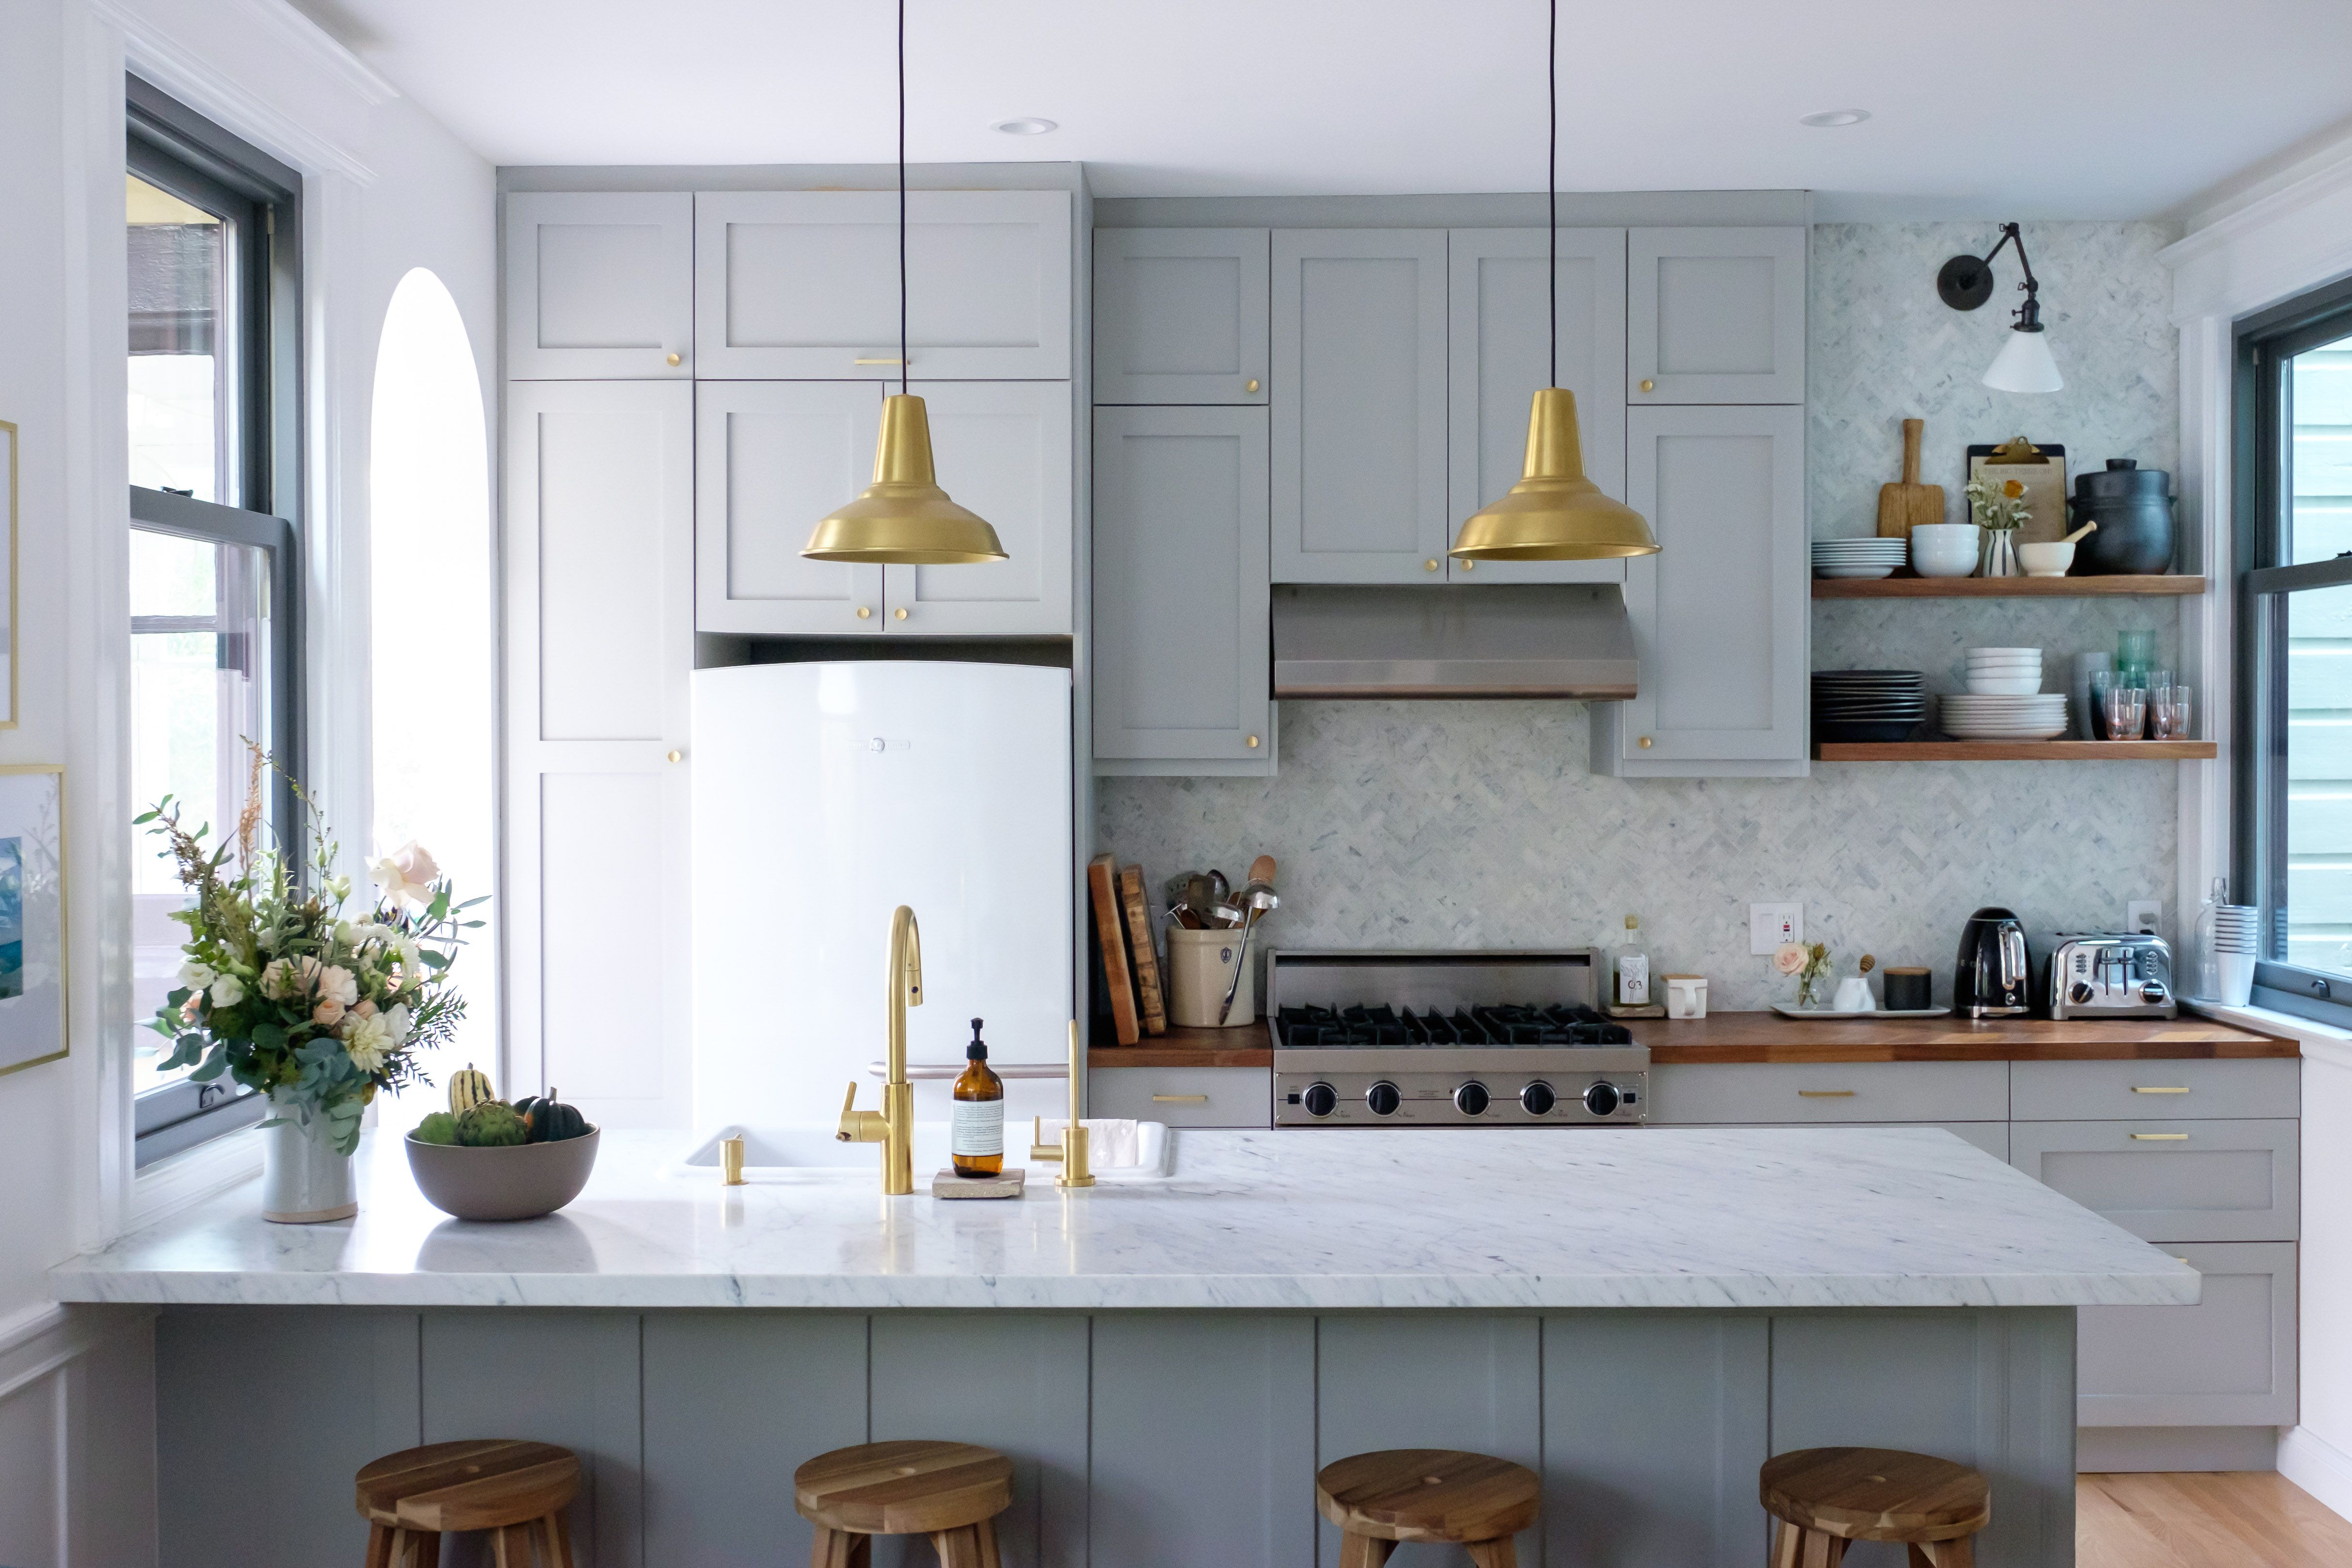 Why Ikea Kitchens Are So Popular 4 Reasons Designers Love Ikea Kitchens